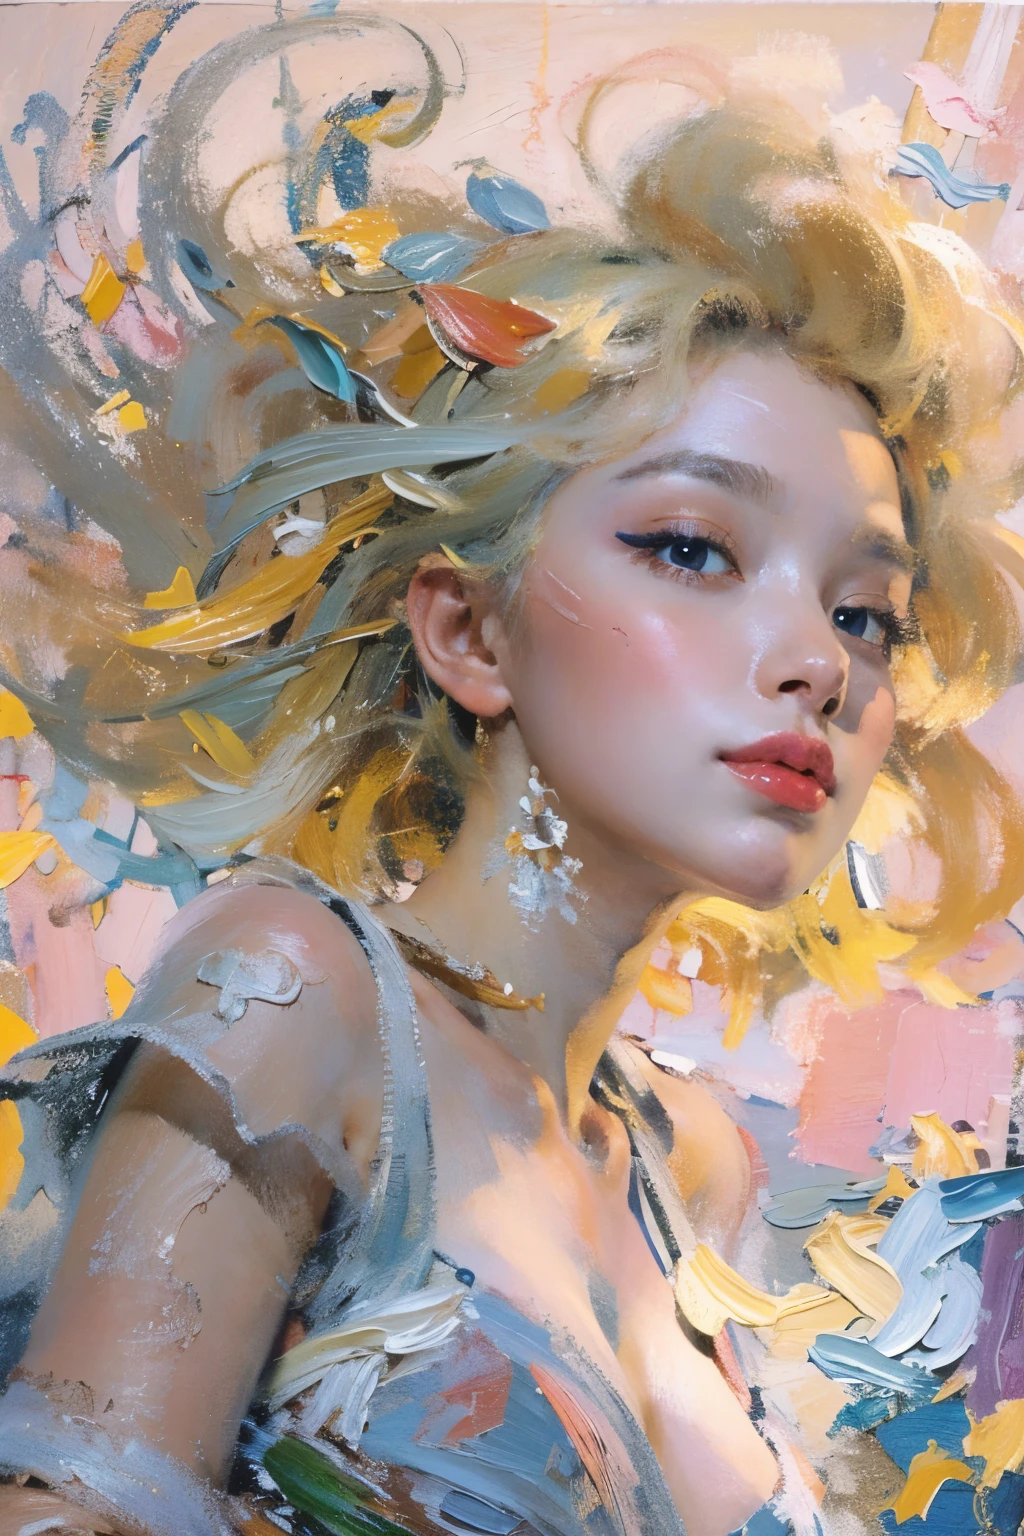 (oil painting:1.5), (NSFW:1.2), a woman joyfully twirling in the raining paint, paint raining, thick paint rainbow hair, body covered with paint, joyful, ((sfw)), calm facial expression, relaxed, gentle smile, (clothes made of liquid paint)), front view, (a girl with sailor moon style),illustration, vibrant colors, magical atmosphere,sparkling eyes,long blonde hair,anime art,smiling expression,cute pose,cosmic background,moonlit night,fantasy world,sparkling stars,stylish outfit,tiara,moon scepter,heart-shaped brooch,wavy hair,flowing ribbons,powerful magical aura,moonlight shining on her,shimmering details,glowing transformation sequence,peaceful and confident,sailor guardian of love and justice,inspired by the iconic anime series. Create an illustration using the soft and ethereal qualities of watercolor. Beautiful pink skin anime model full body, sun-bathing on floating cloud along the suns surface, enticing eyes, curly hair dreamy, background thick clouds,, hyperdetailed, detailed, (masterpiece) . high fashion, luxurious, extravagant, stylish, , opulent, elegance, stunning beauty, professional, high contrast, detailed, Depict a dreamy, whimsical scene with elements that seem to merge with the background